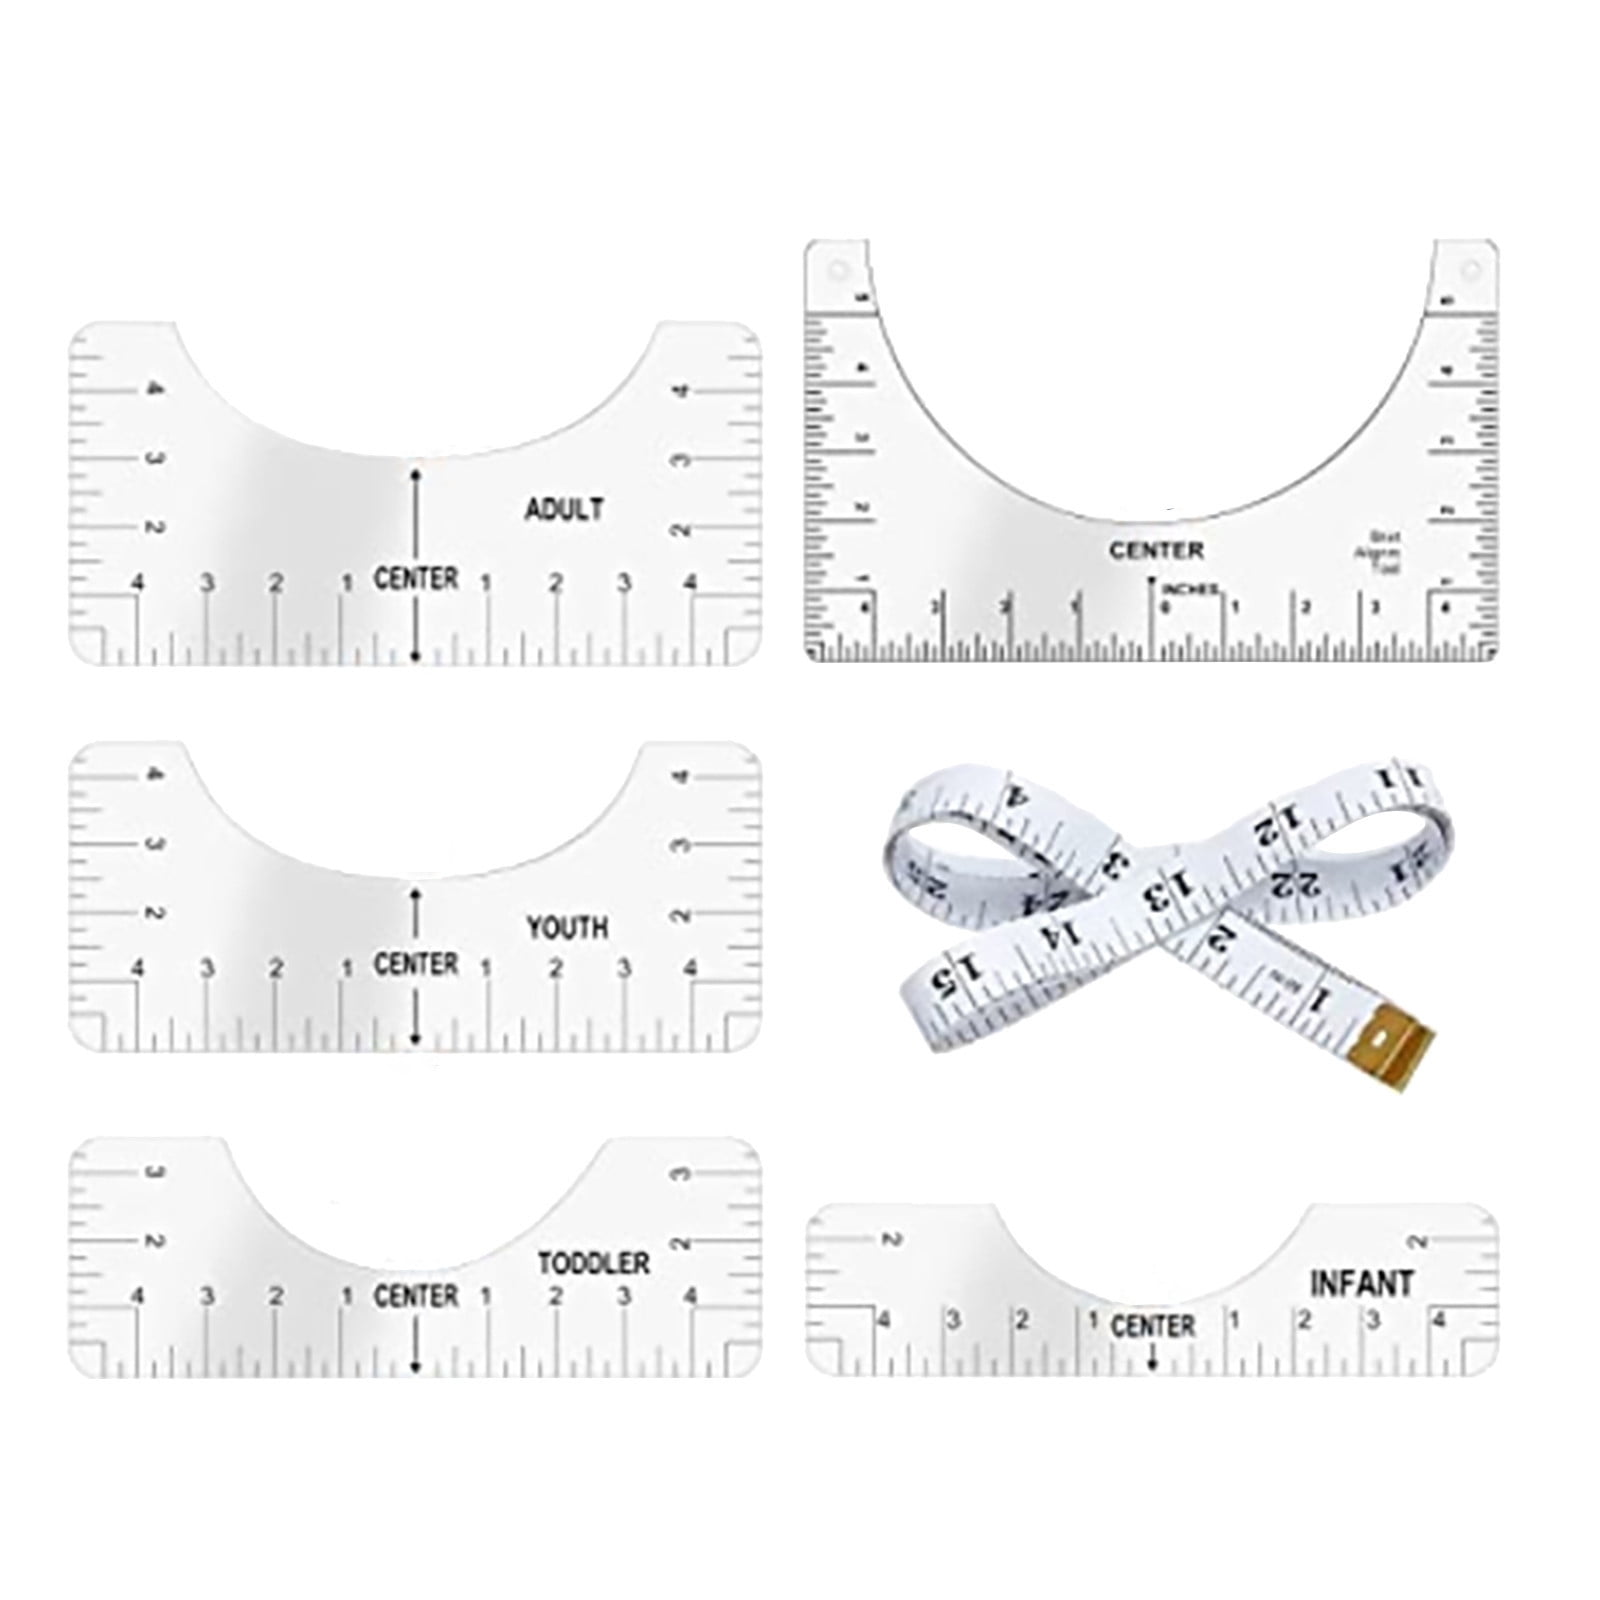 Standard Size - Tshirt Ruler Guide for Vinyl Alignment, T Shirt Rulers to  Center Designs, T Shirt Ruler Alignment Tool Placement, Tshirt Guide Ruler